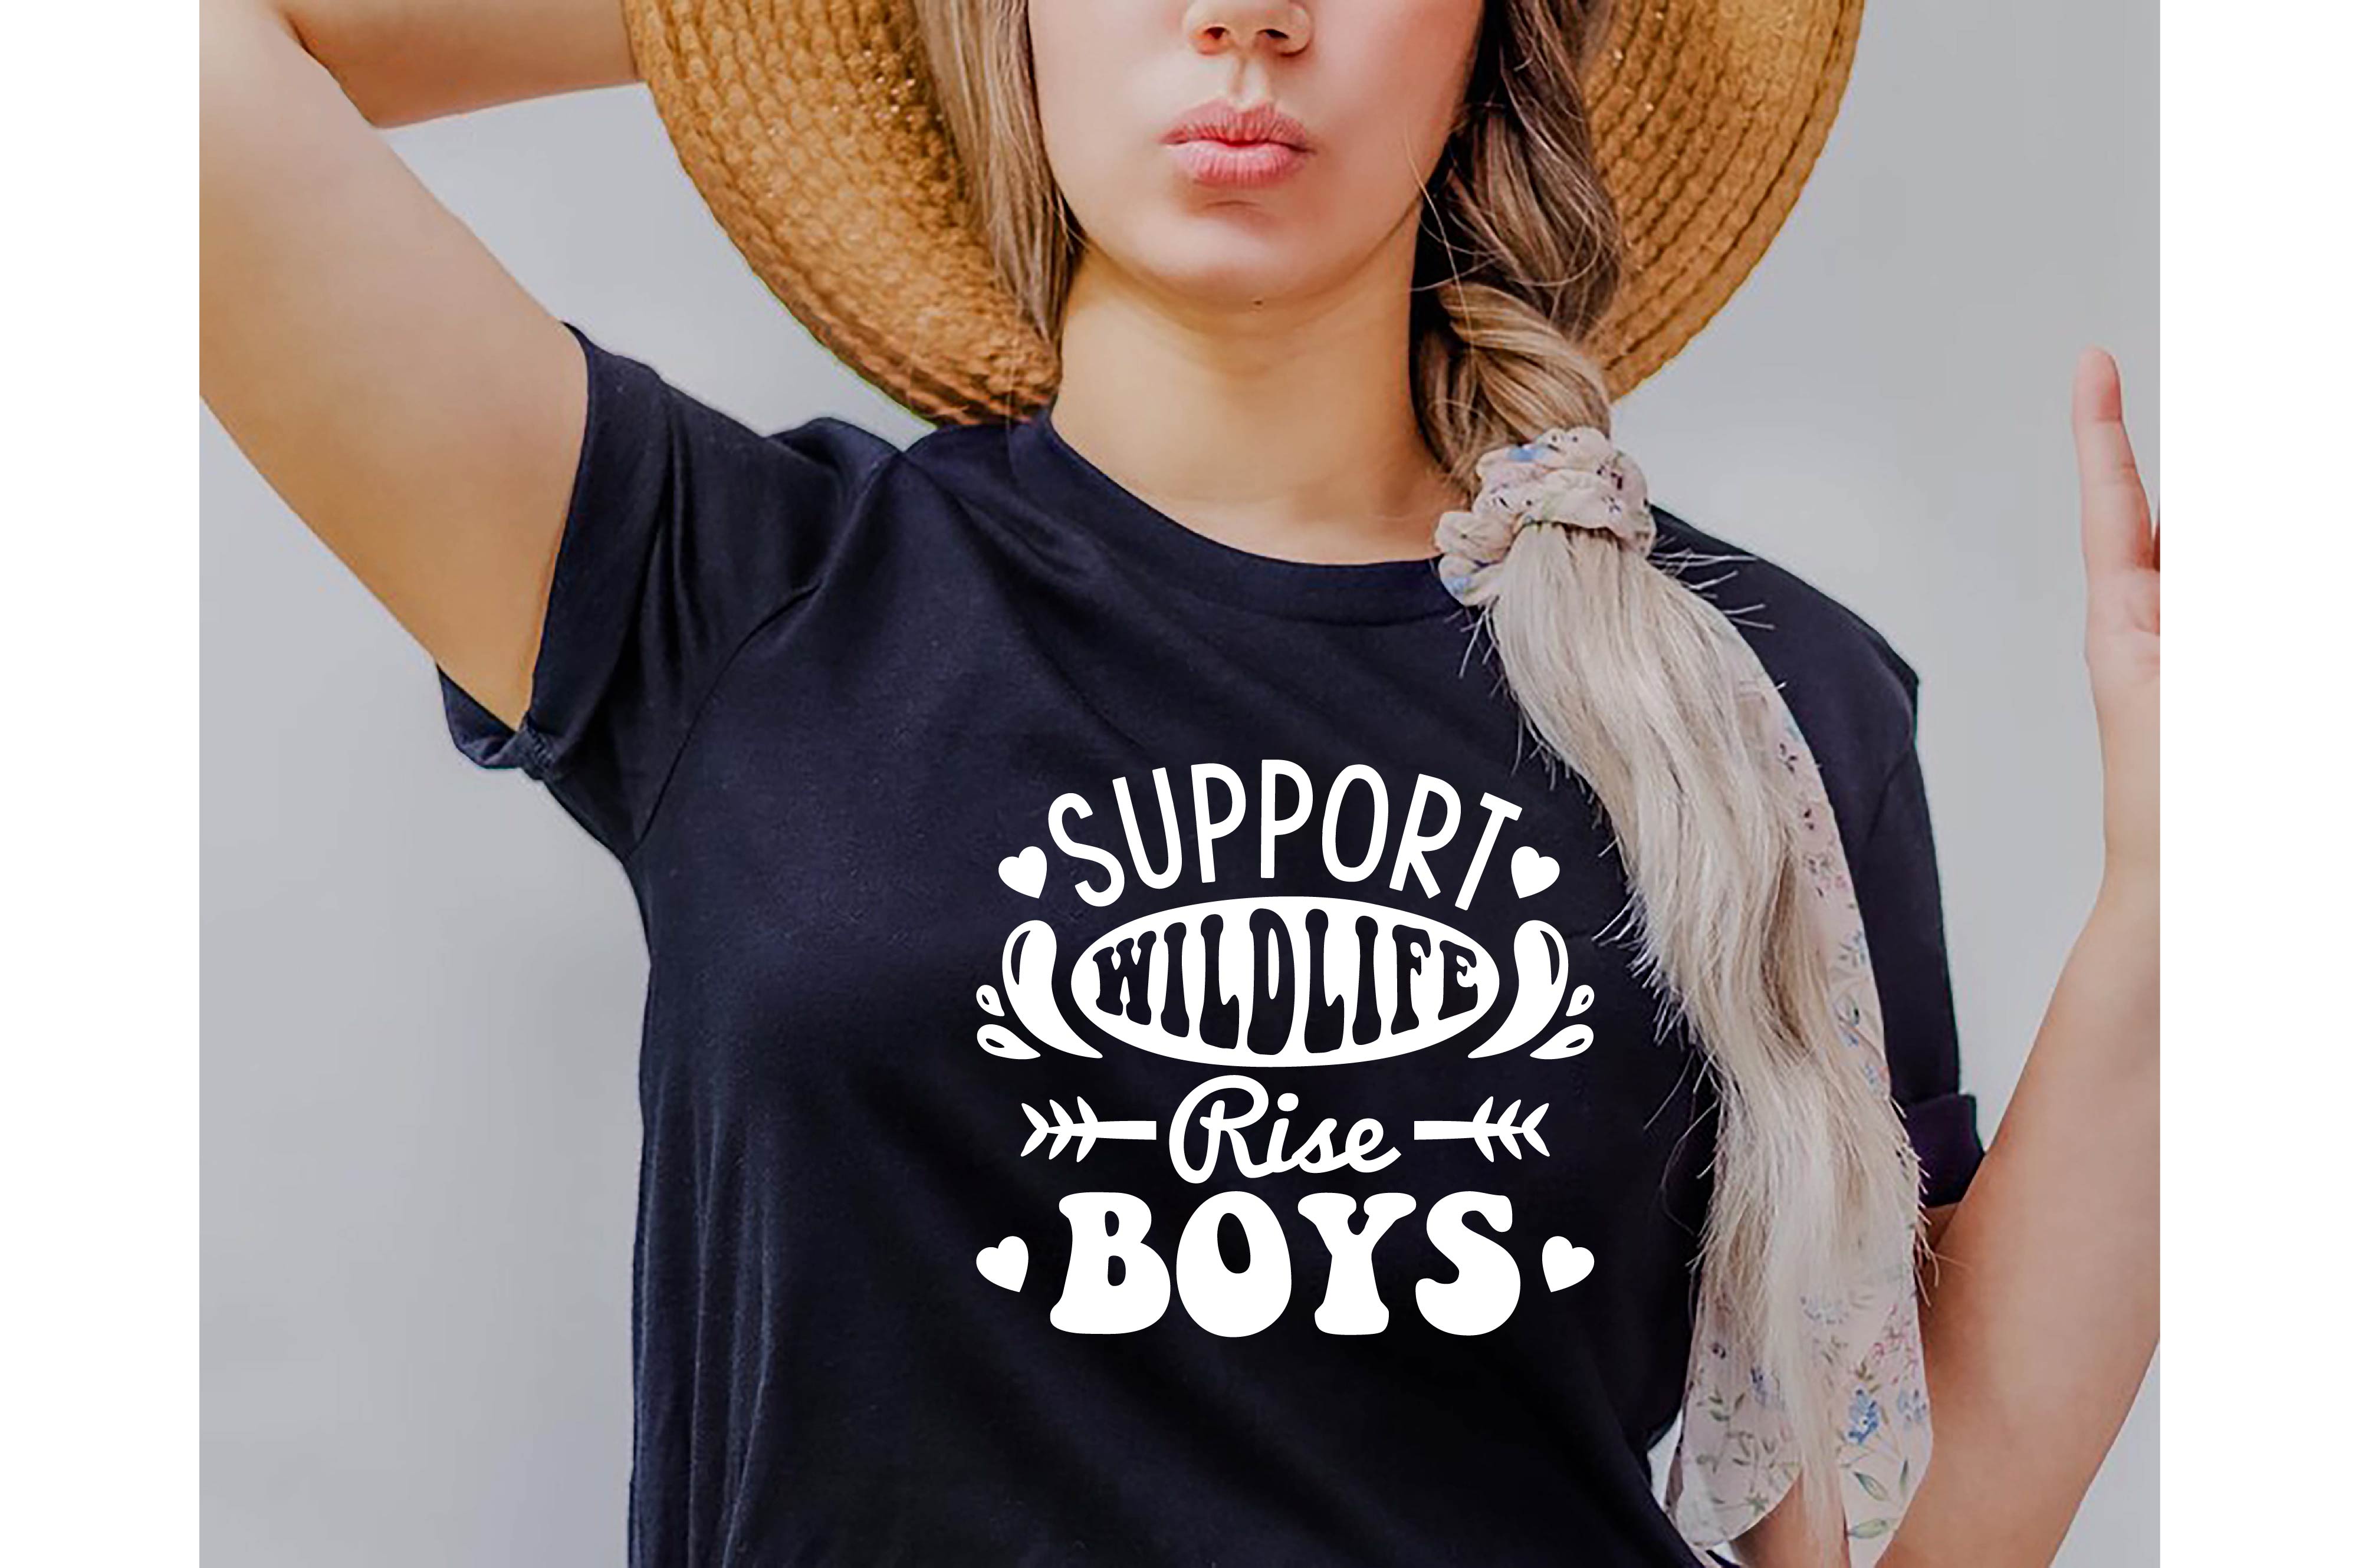 Woman wearing a t - shirt that says support child rise boys.